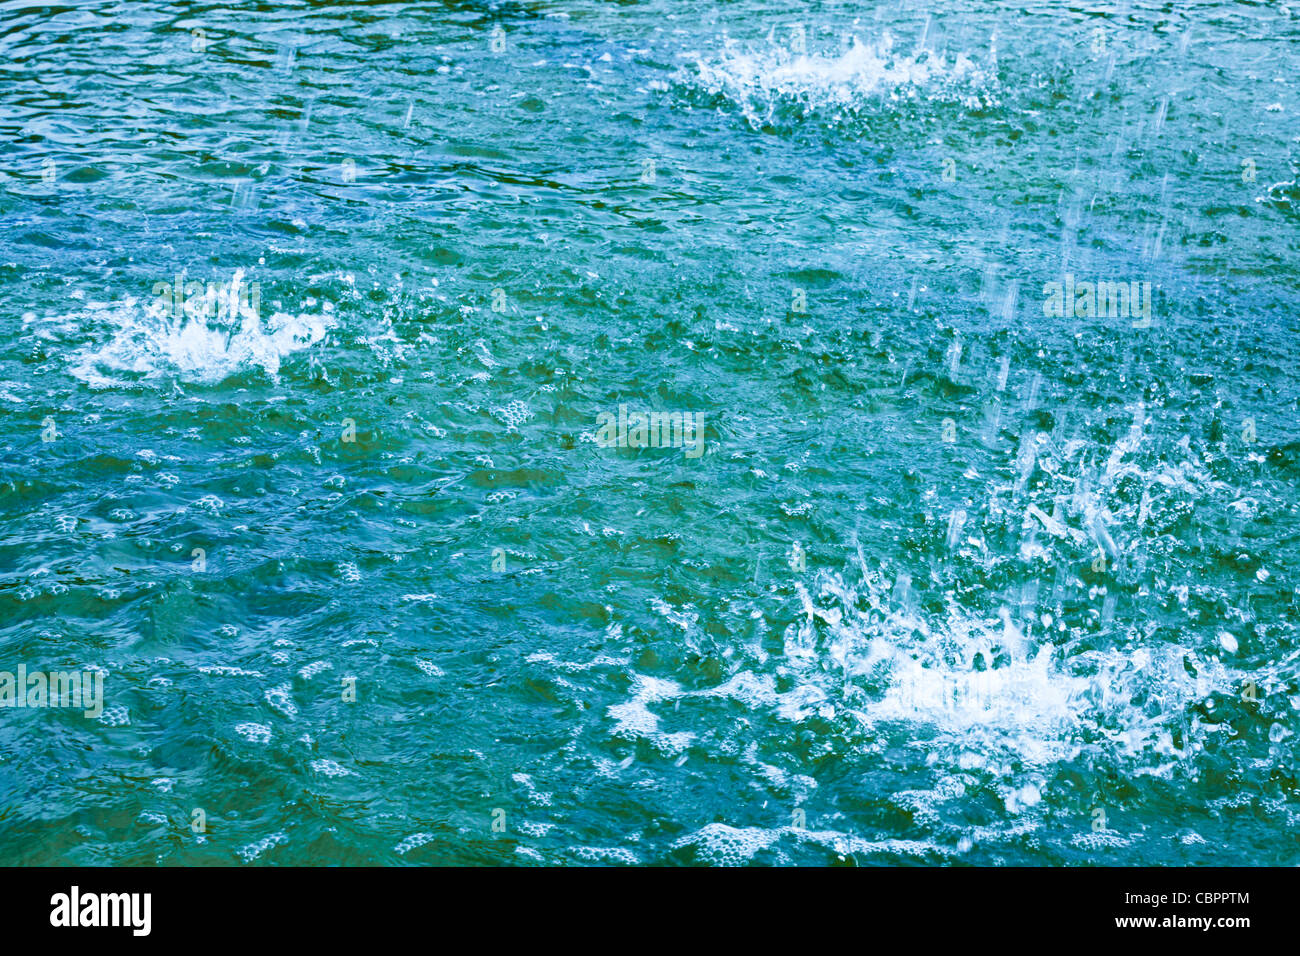 Water splashes background. A pool of blue water with more water splashing into it. Stock Photo